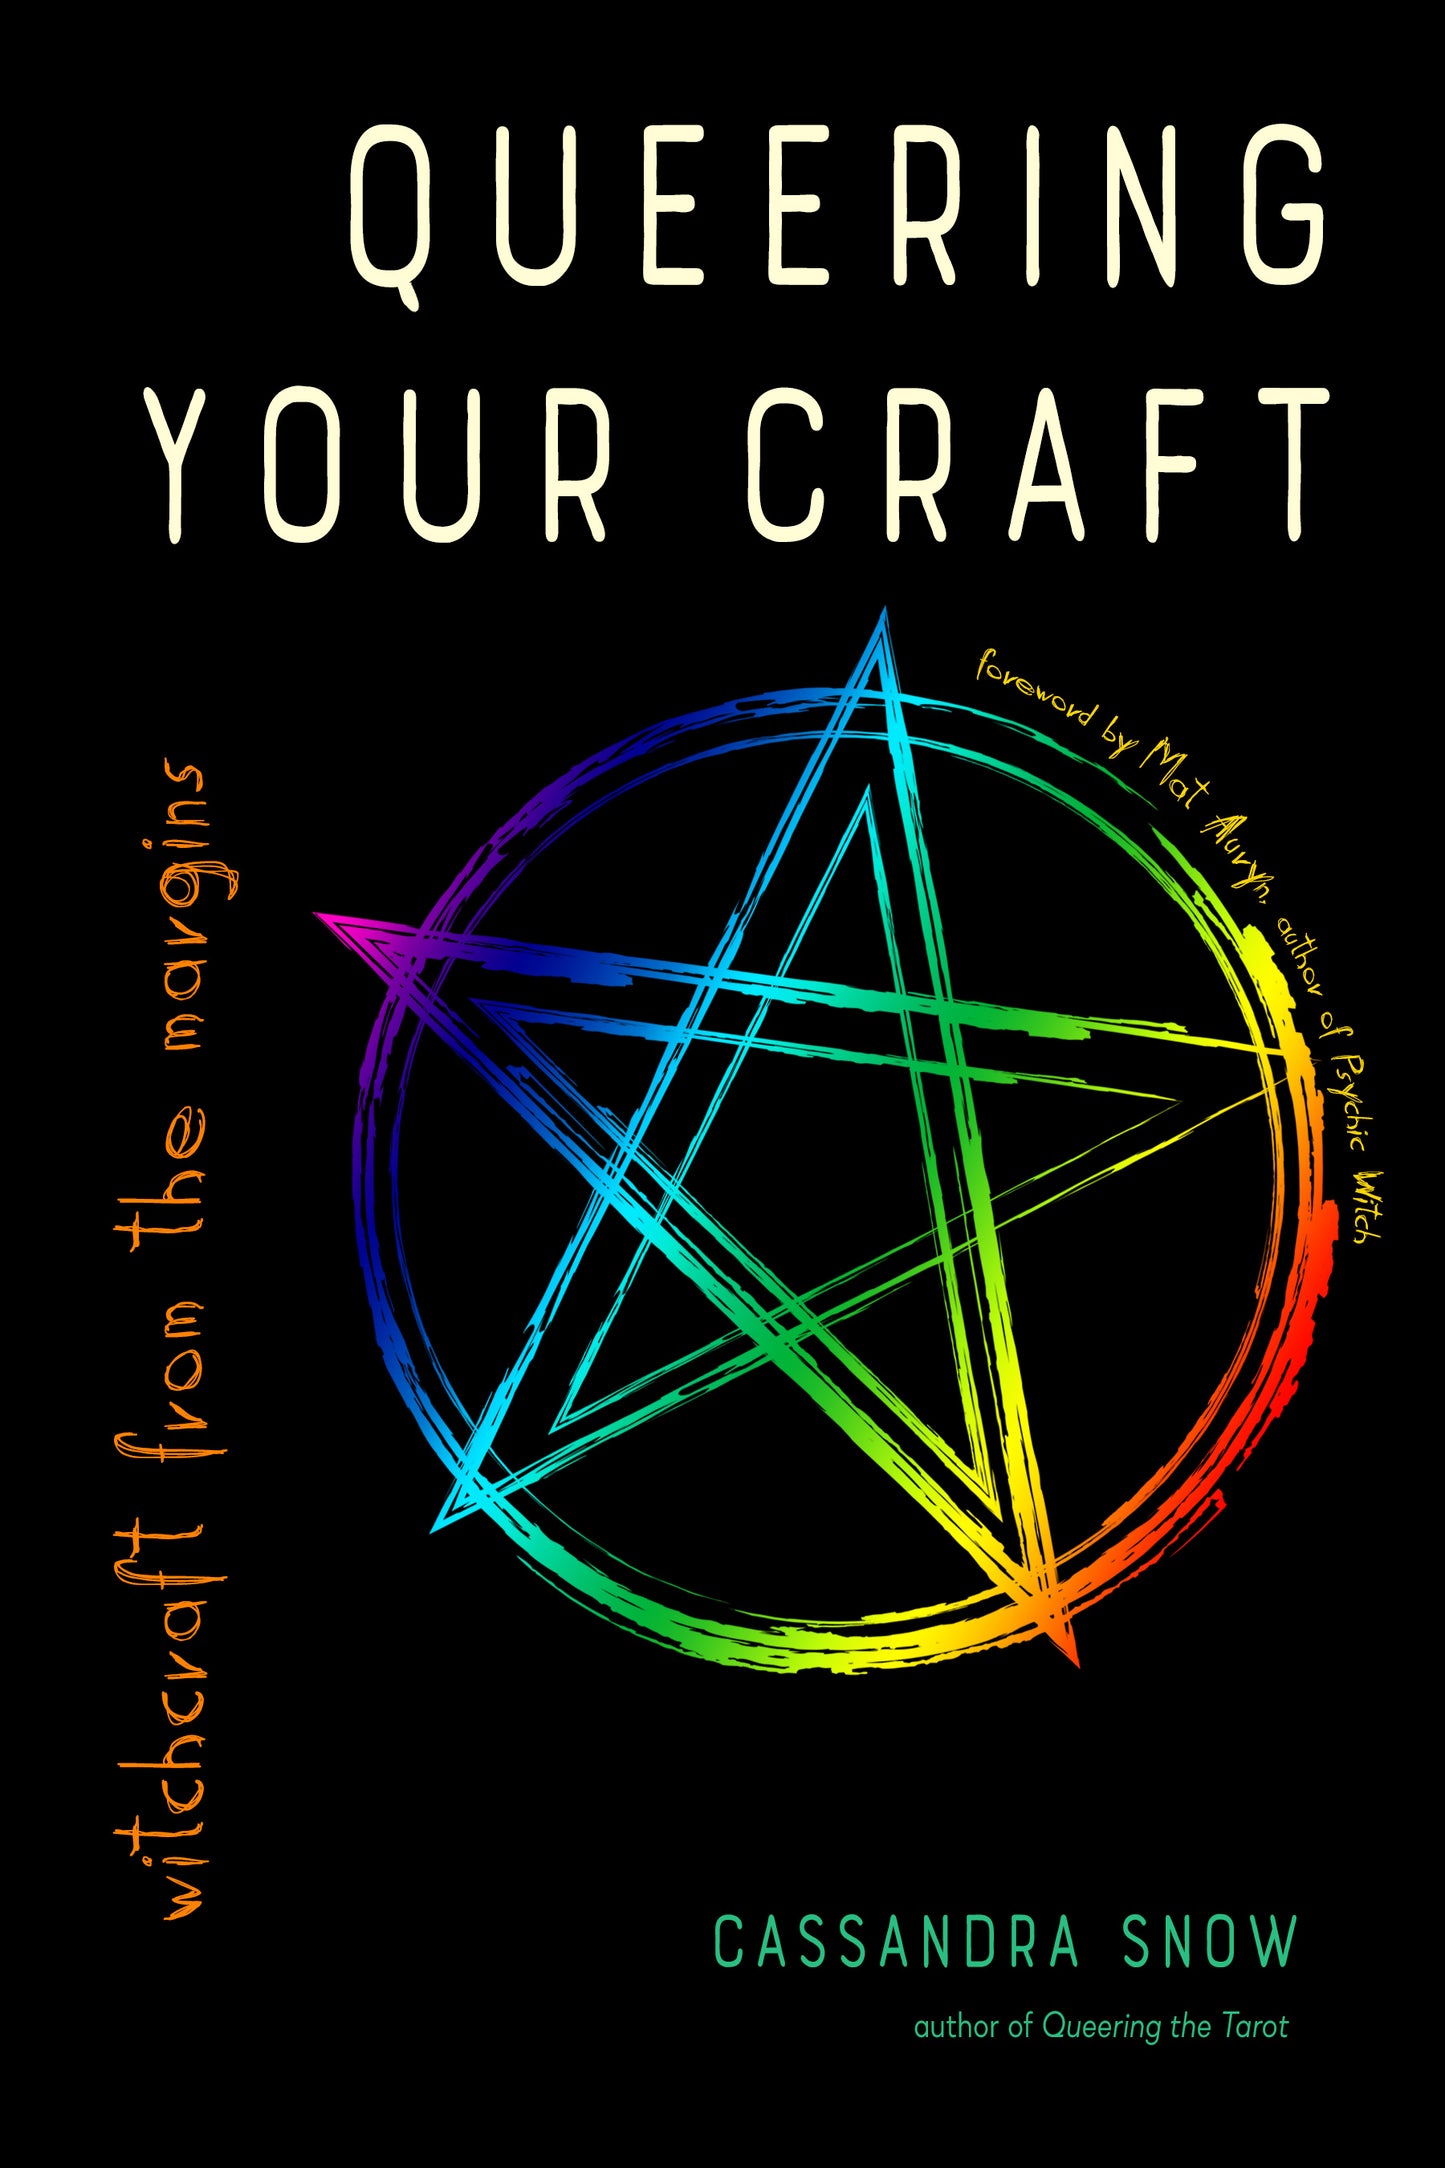 Queering Your Craft, by Cassandra Snow